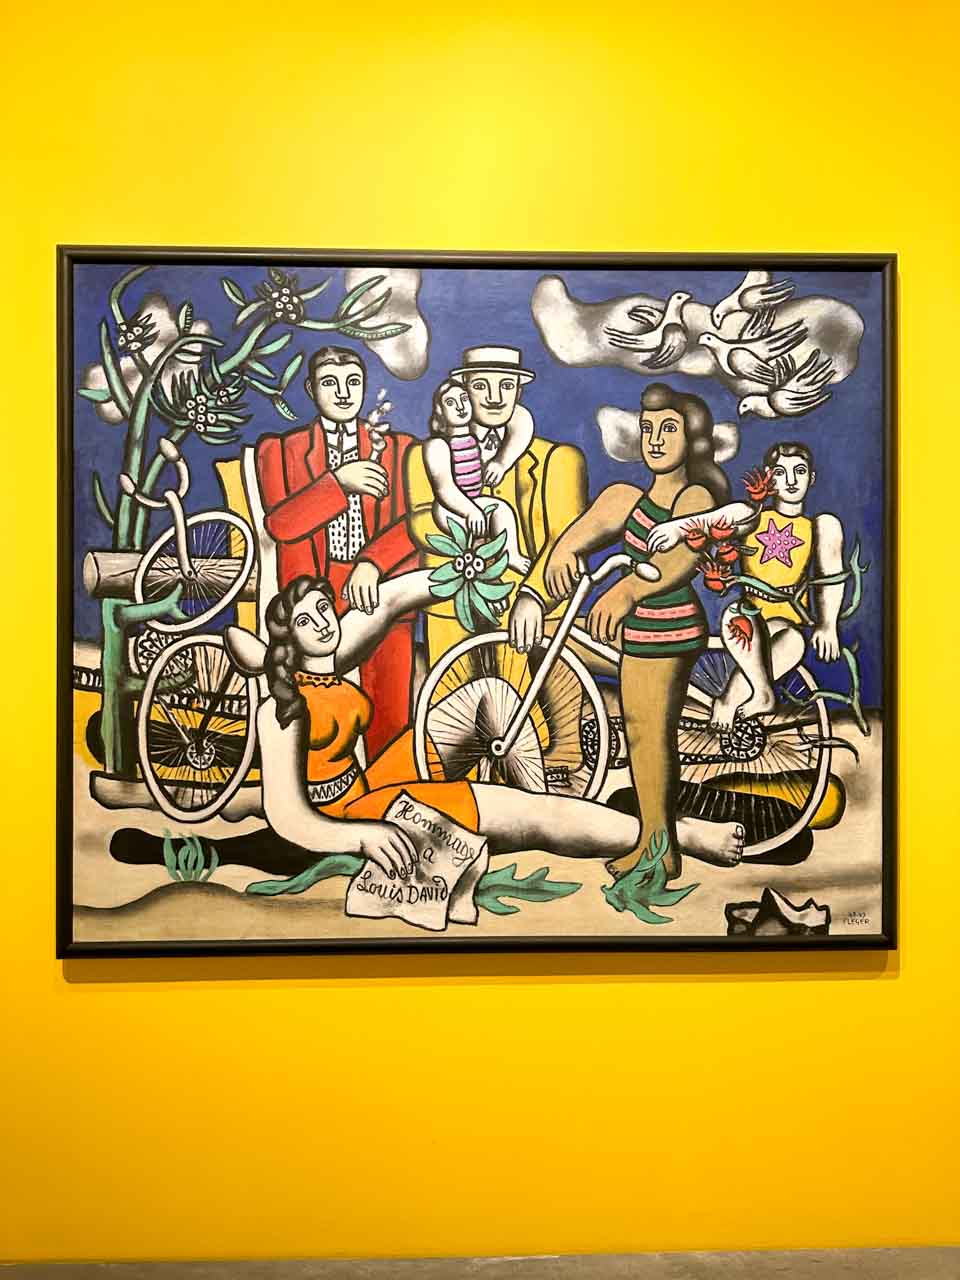 A colourful painting on a yellow wall showing a group of people with bicycles, and doves flying above them